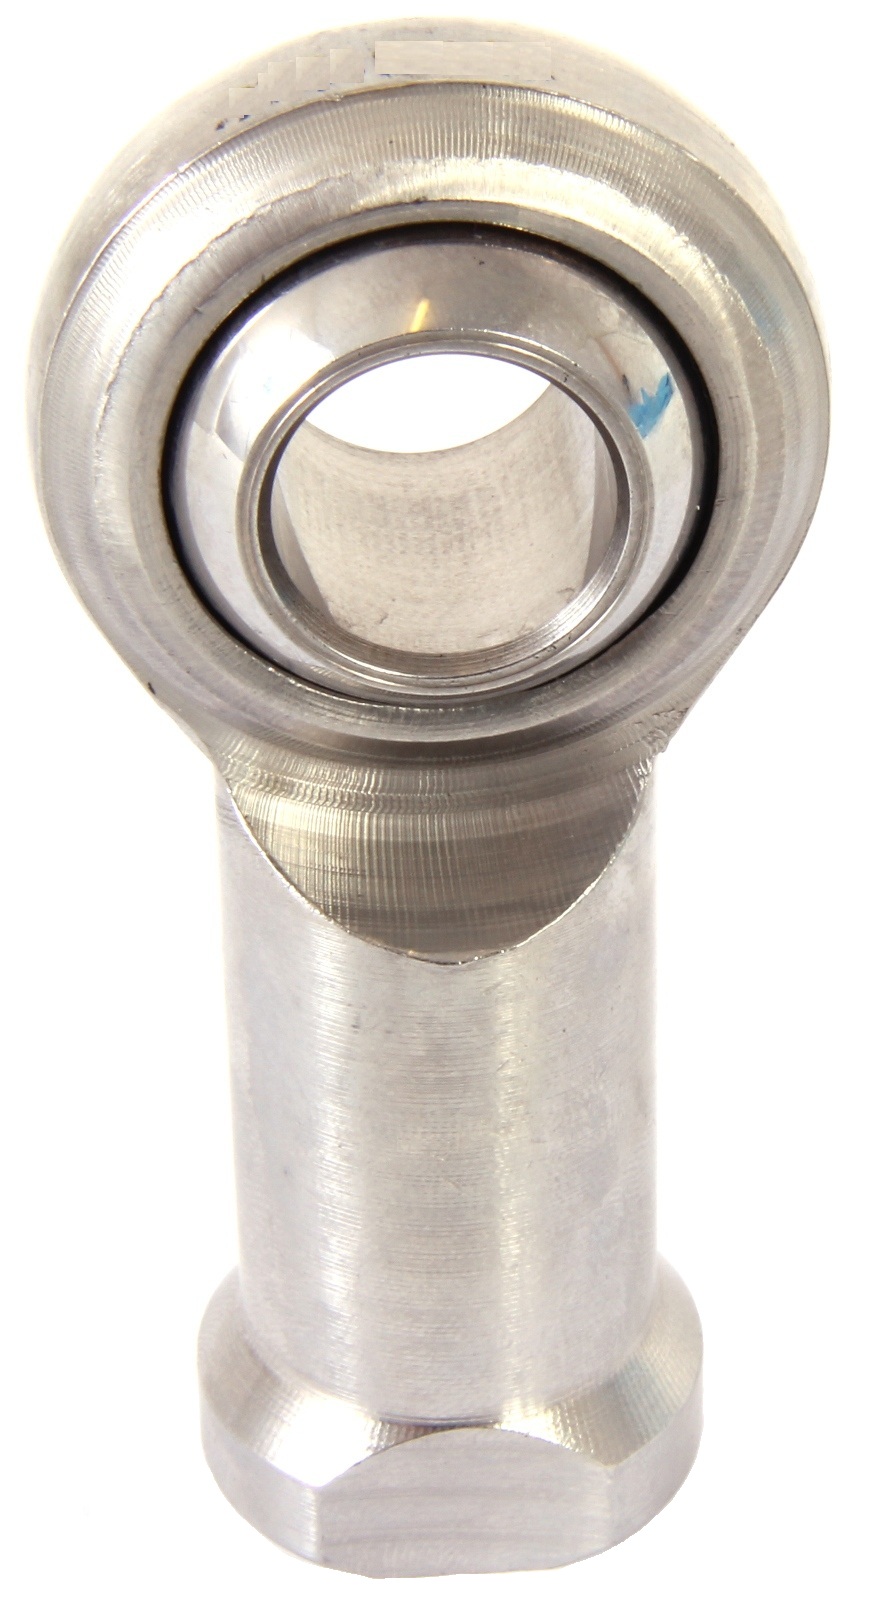 Female Stainless Steel Rod Ends - Maintenance Free